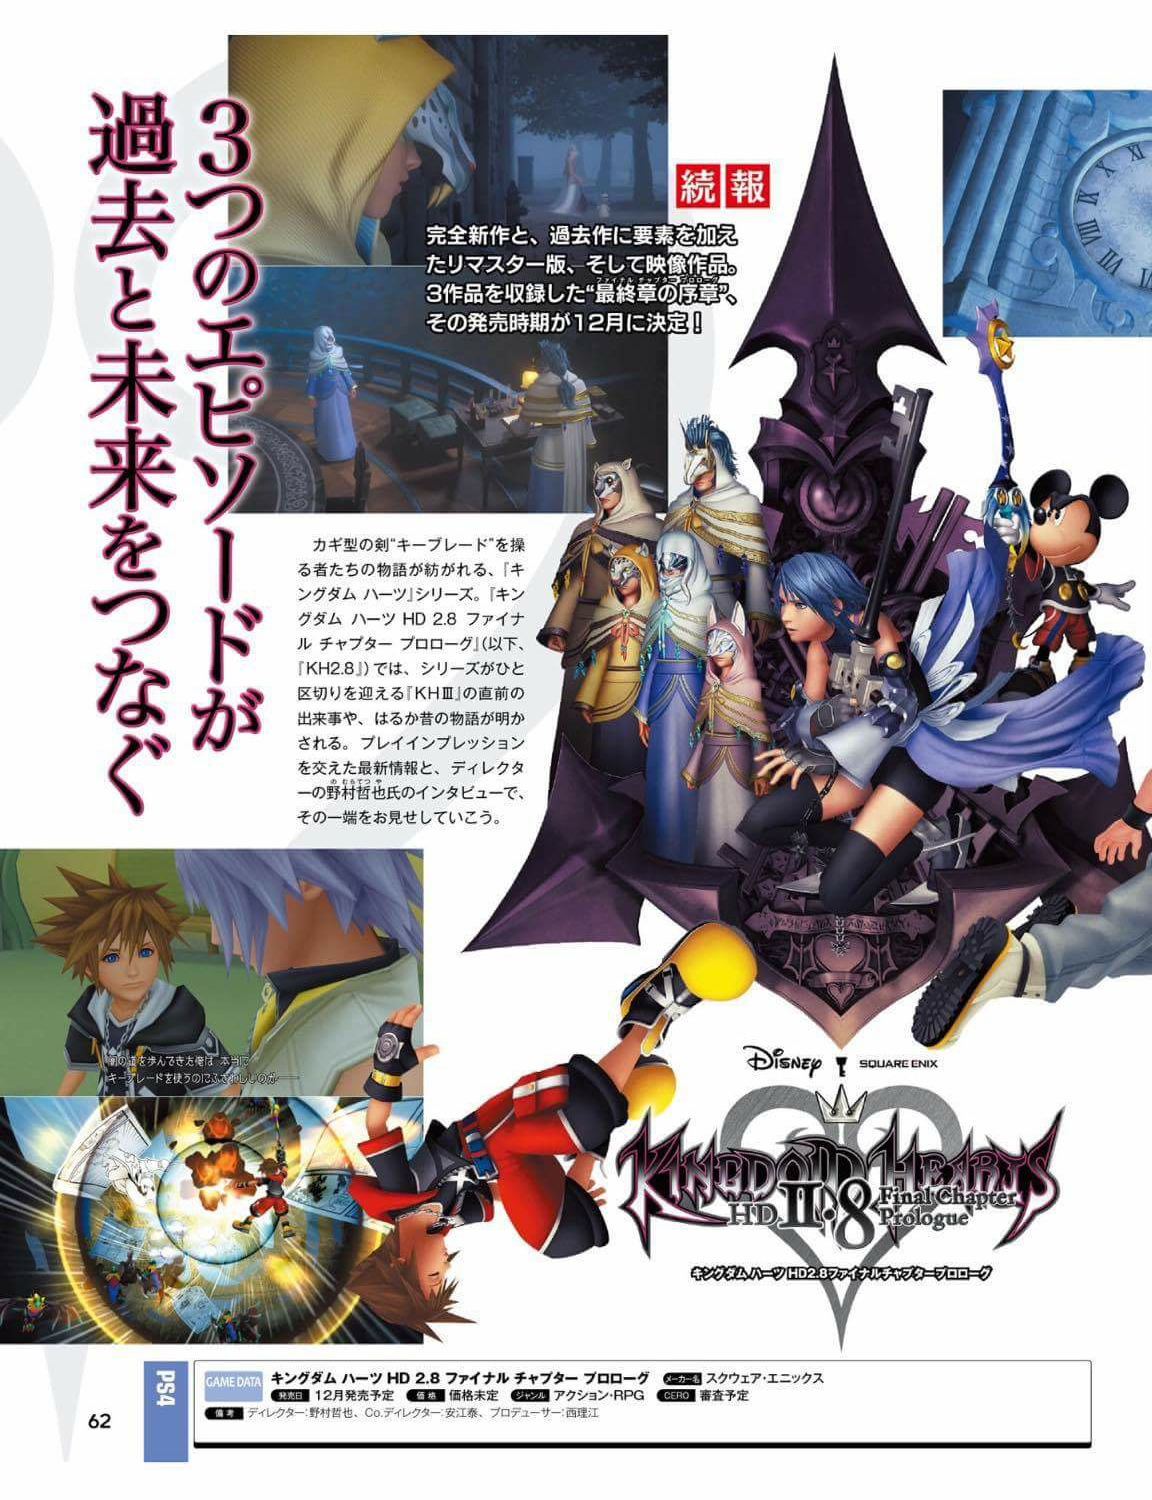 UPDATE] Kingdom Hearts 20th Anniversary Q&A Responses & Missing - Link  Information - Kingdom Hearts News - KH13 · for Kingdom Hearts